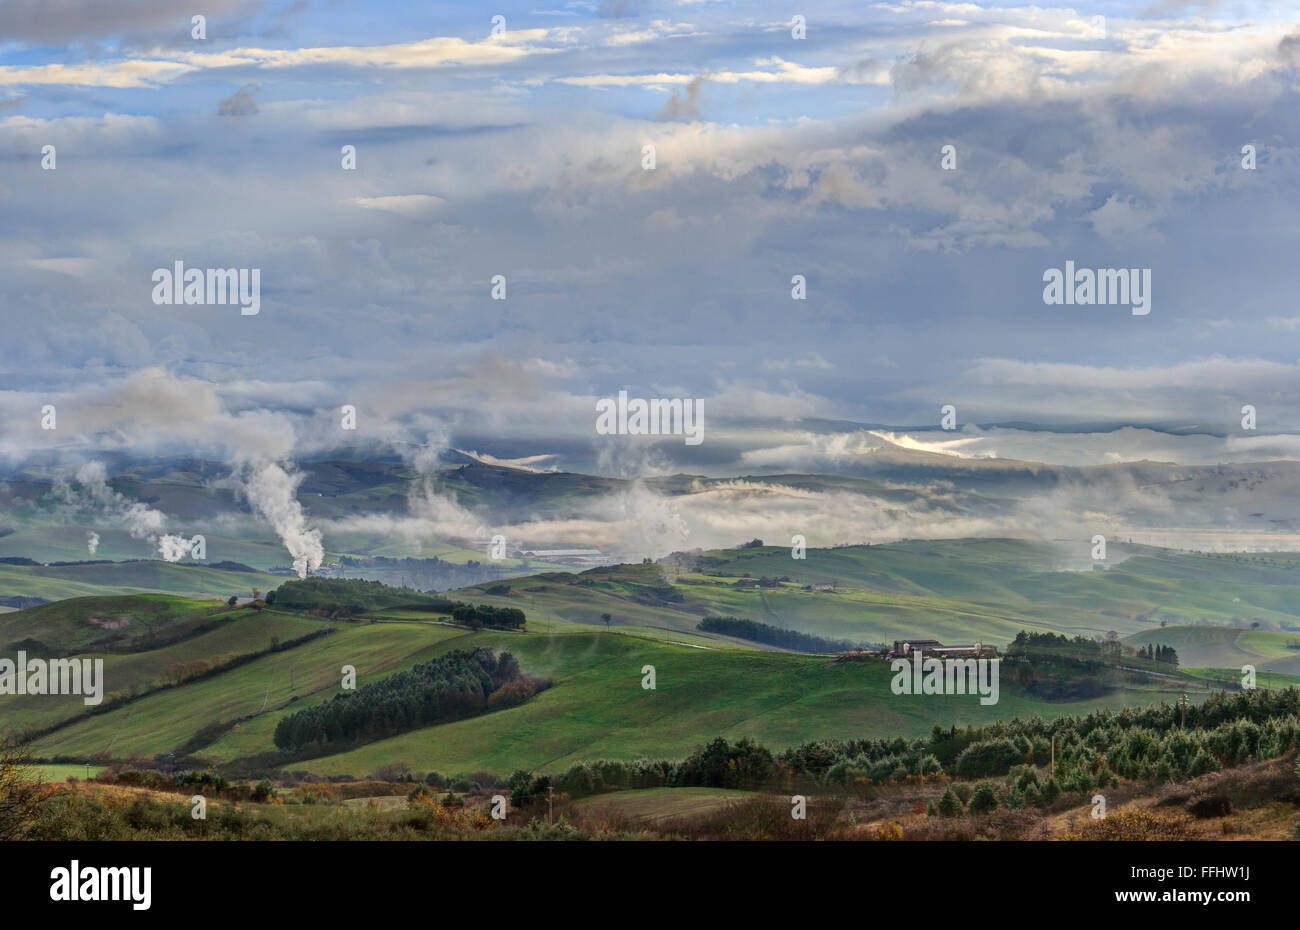 Tuscany landscape with clouds and geothermal plants Stock Photo